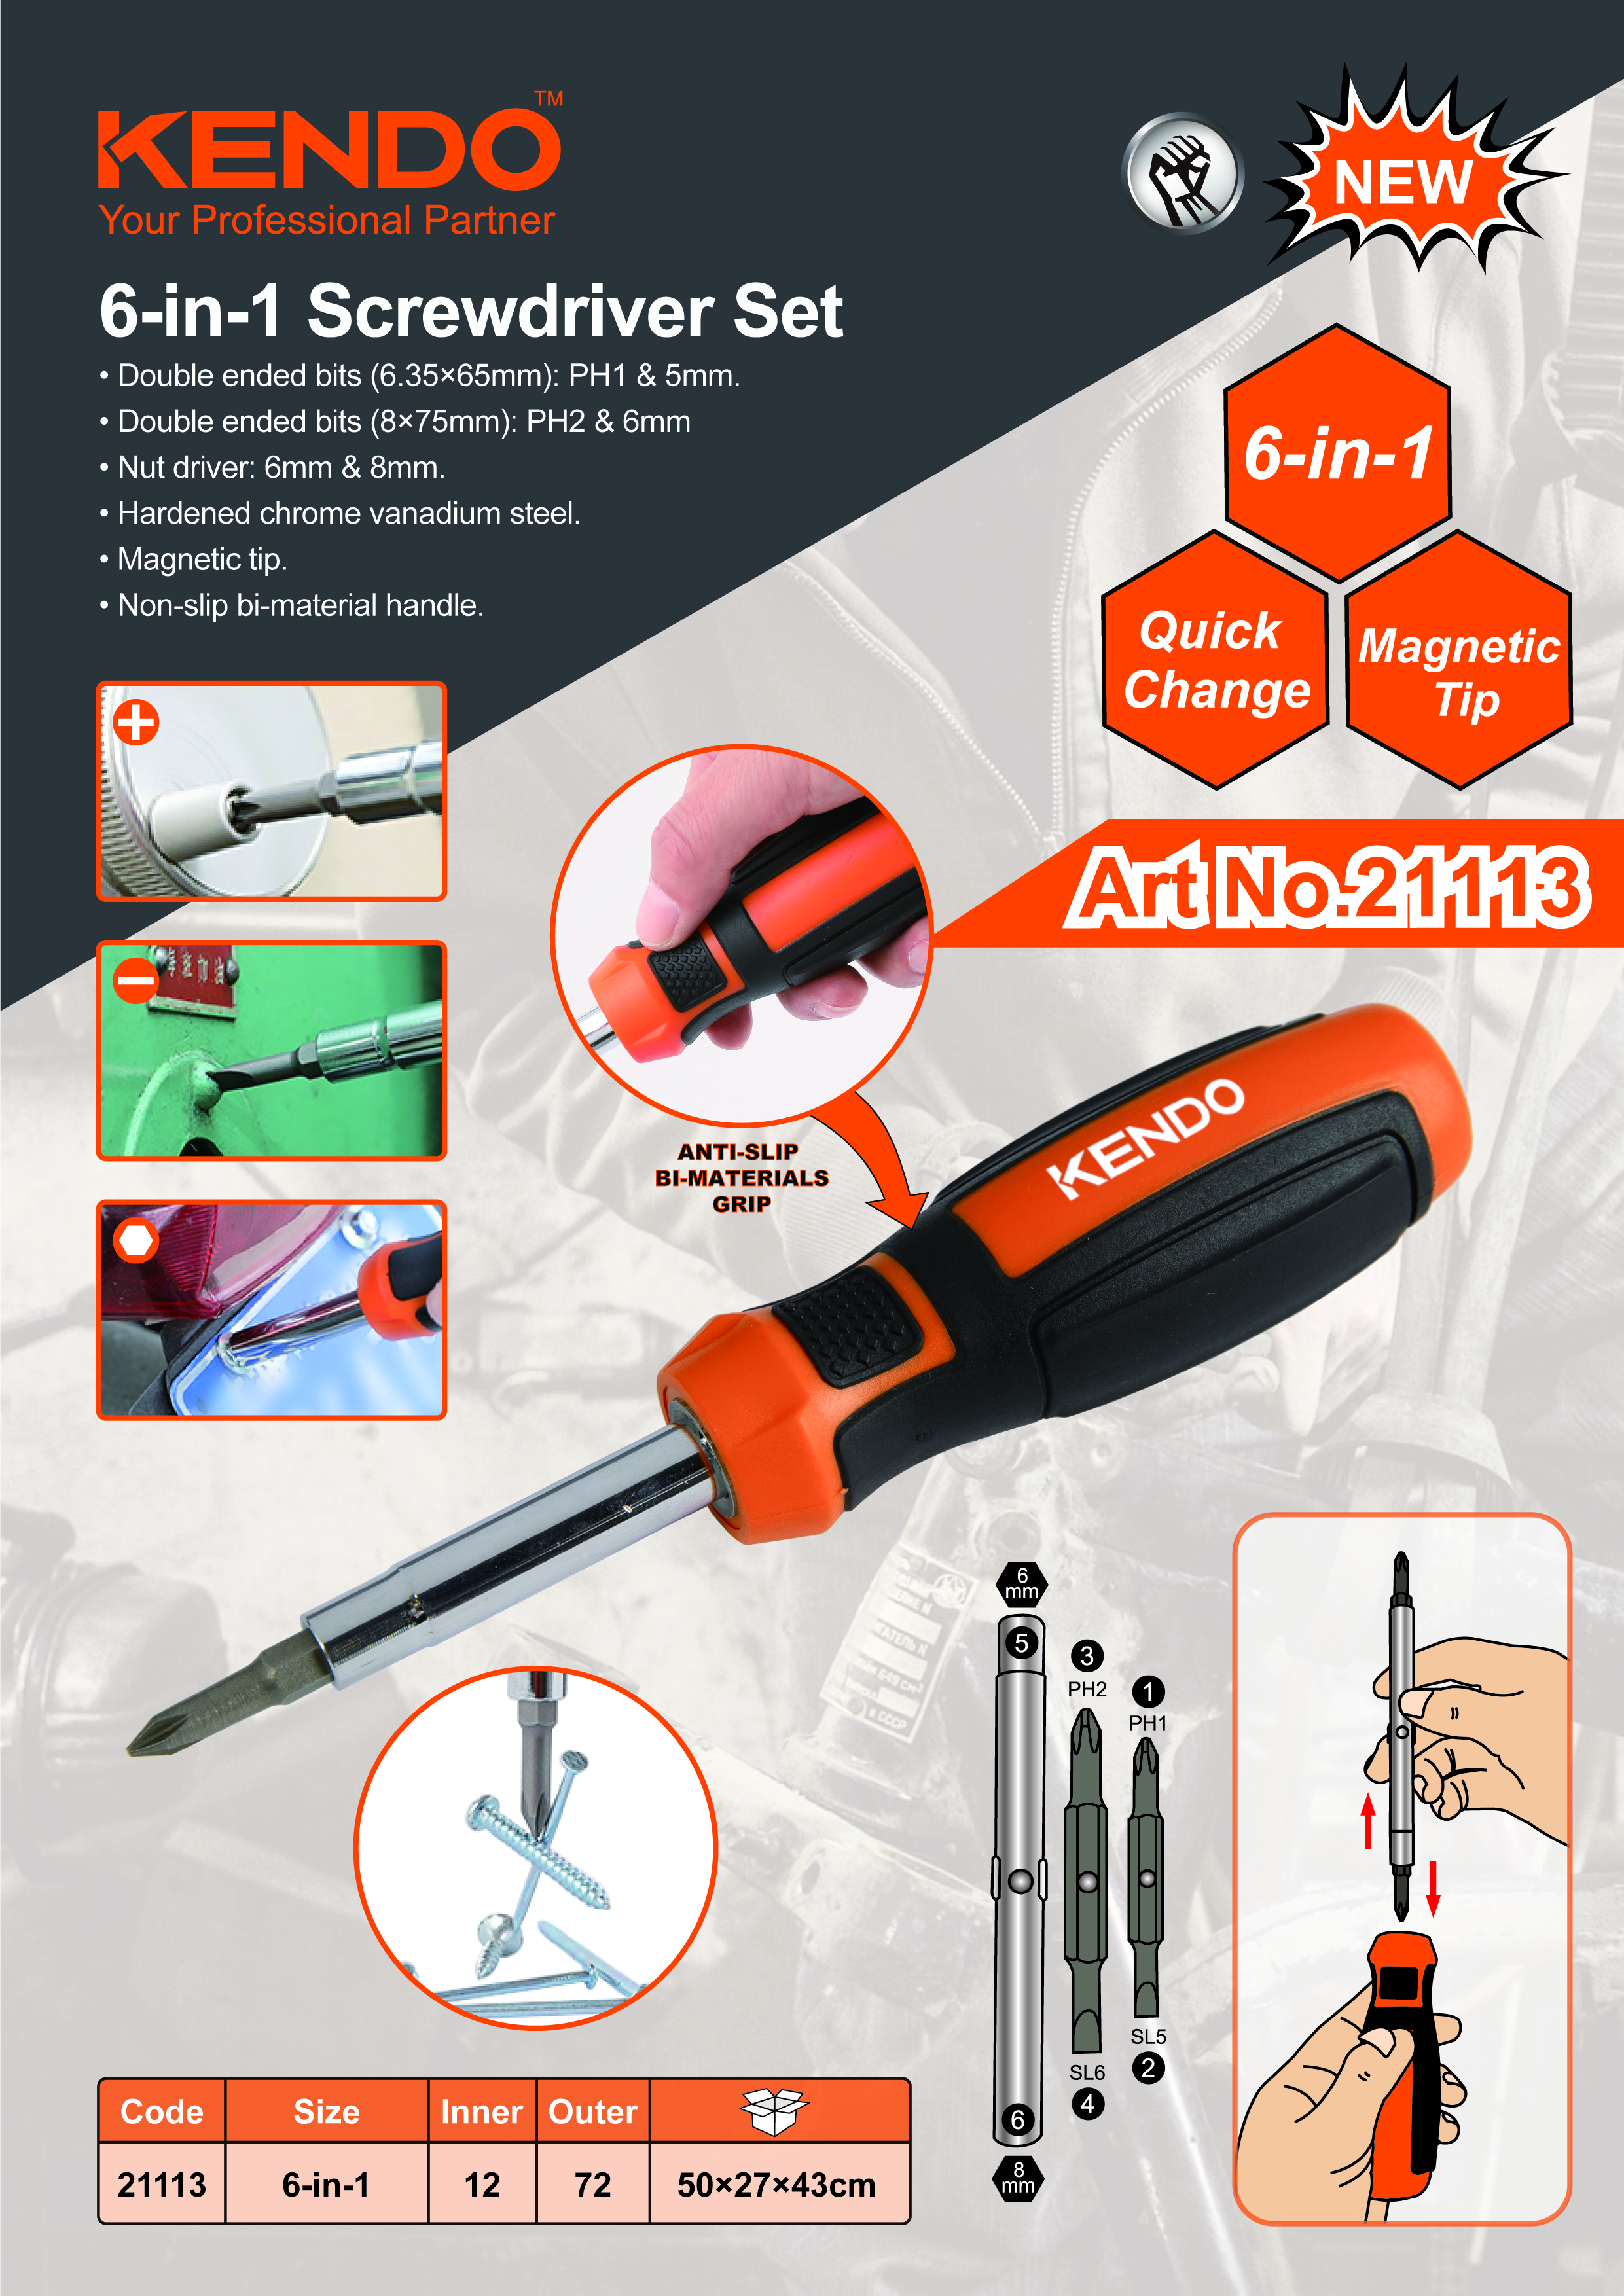 How to use the striking drive screwdriver set? 